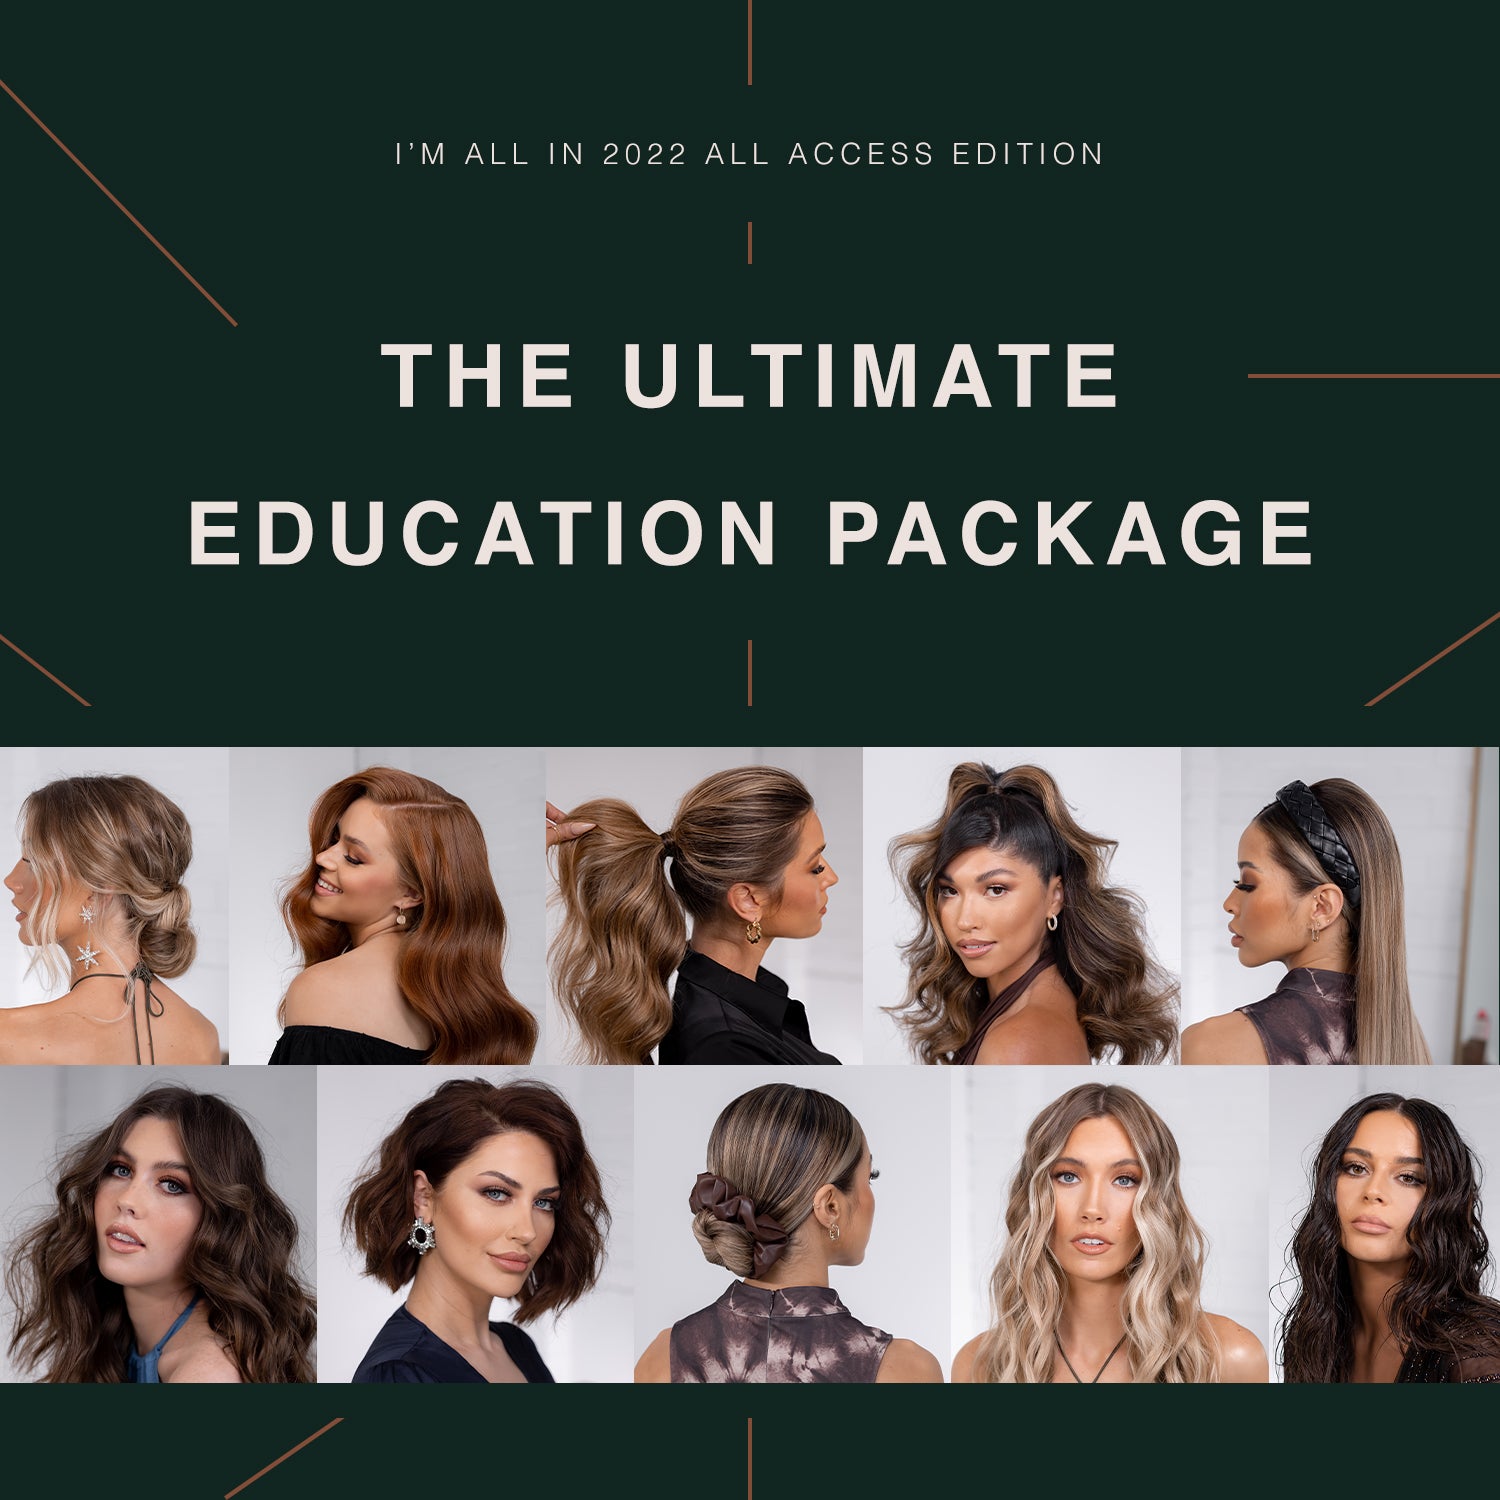 The Ultimate Education Package Un-lock the entire collection